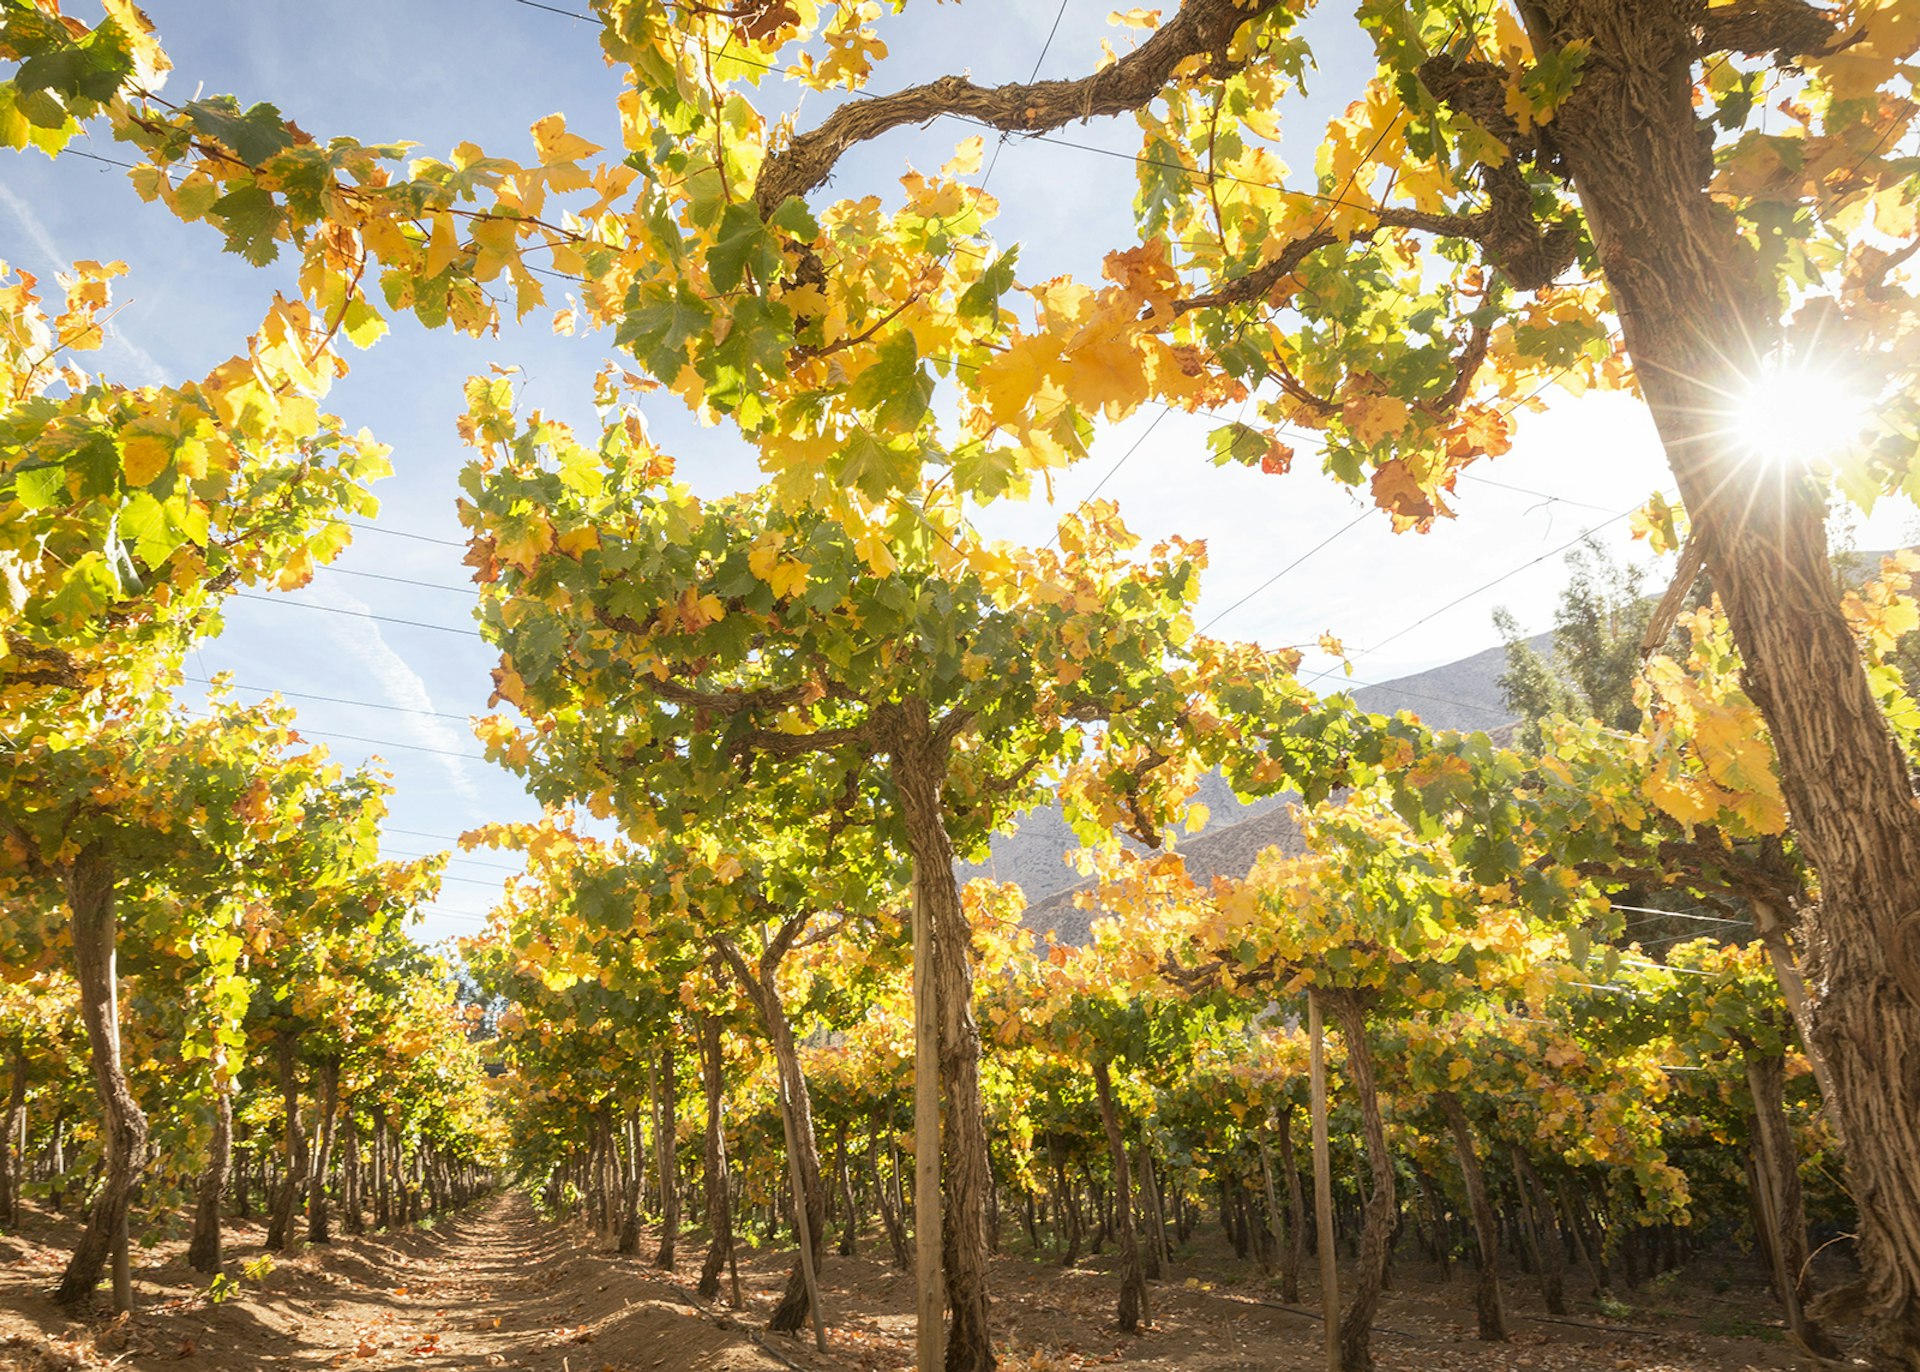 Vines soaking up the sun at a winery in the Elqui Valley © Philip Lee Harvey / Lonely Planet